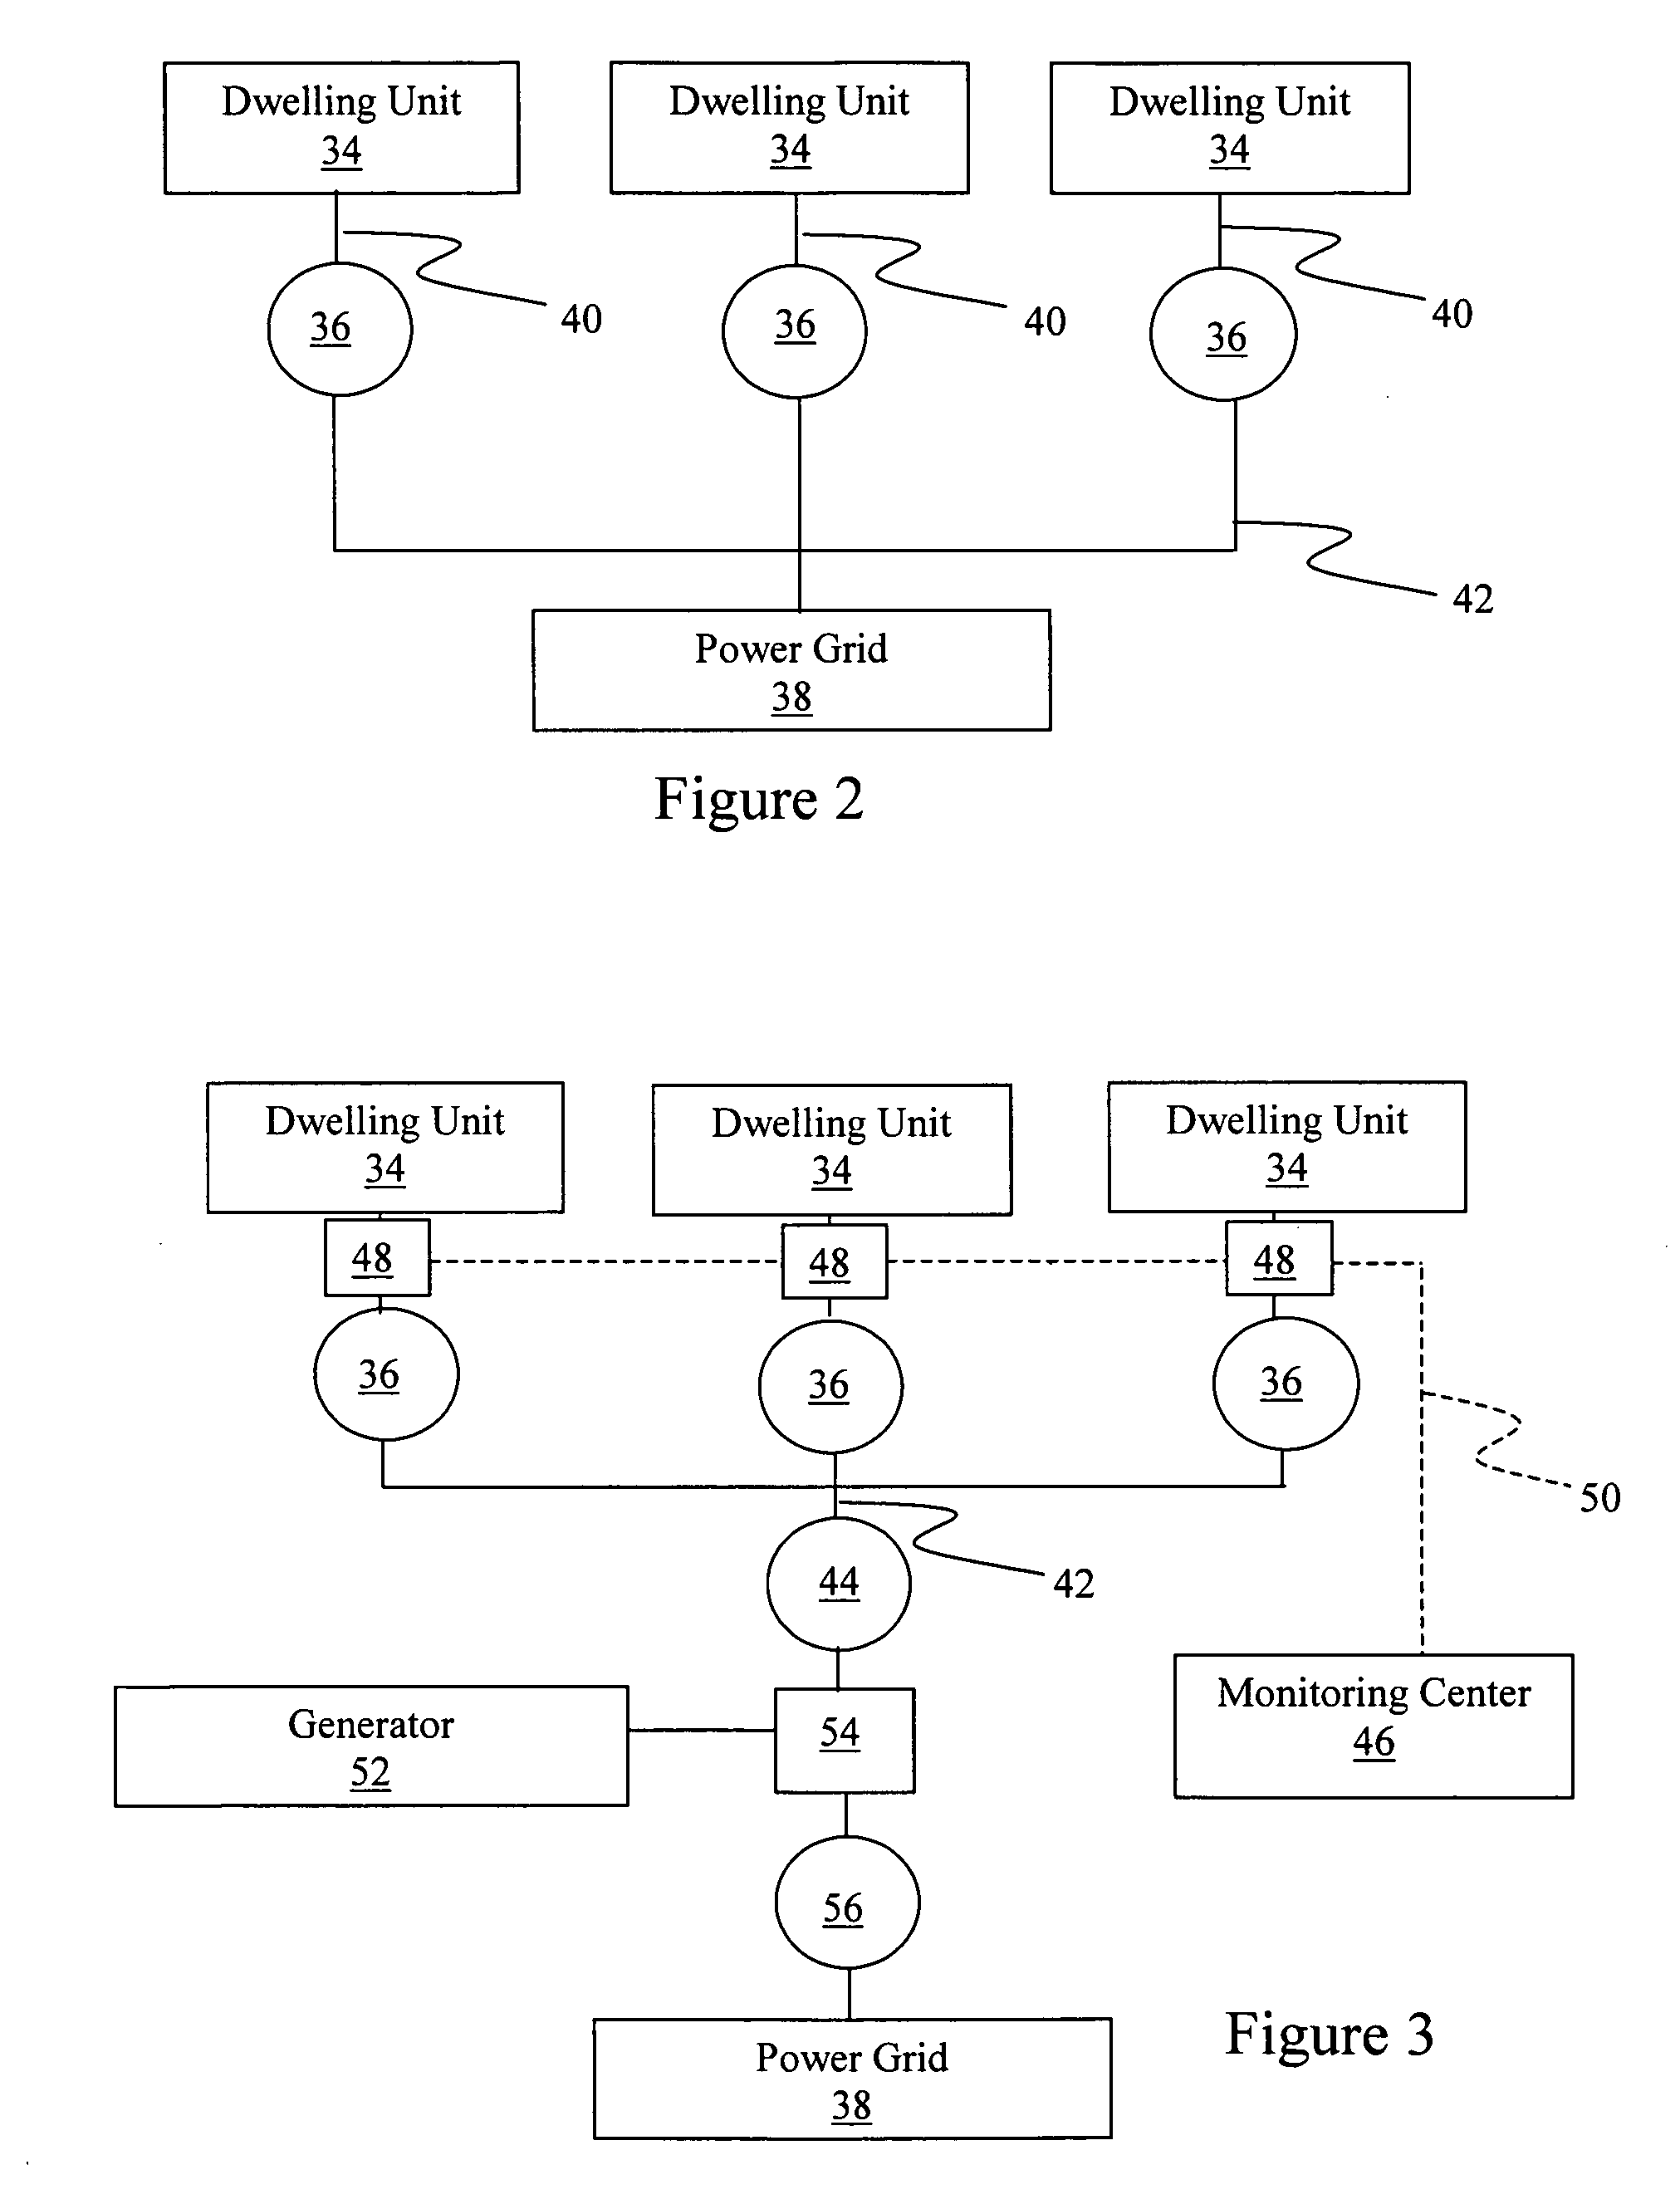 Method and system for improving the efficiency and reliability of a power grid